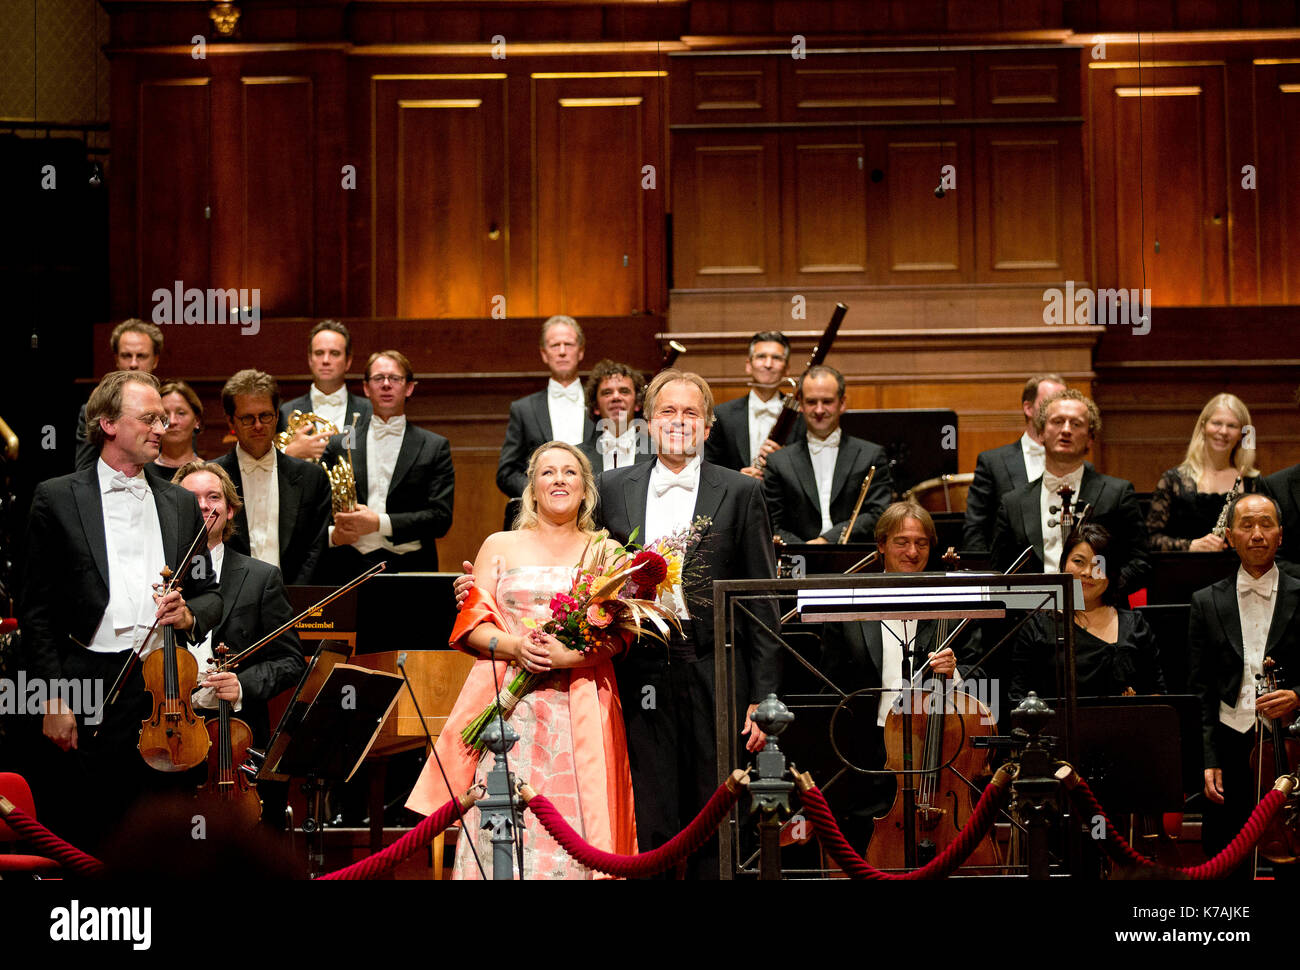 Amsterdam, Netherlands. 14th Sep, 2017. German conductor Thomas Hengelbrock and German soprano Diana Damrau Queen Máxima of The Netherlands at the Concertgebouw in Amsterdam, on September 14, 2017, to attend the opening of the new season of the Koninklijk Concertgebouworkest, RCO Opening Night Photo: Albert Nieboer/Netherlands OUT/Point De Vue Out - NO WIRE SERVICE - Photo: Albert Nieboer/Royal Press Europe/RPE/dpa/Alamy Live News Stock Photo